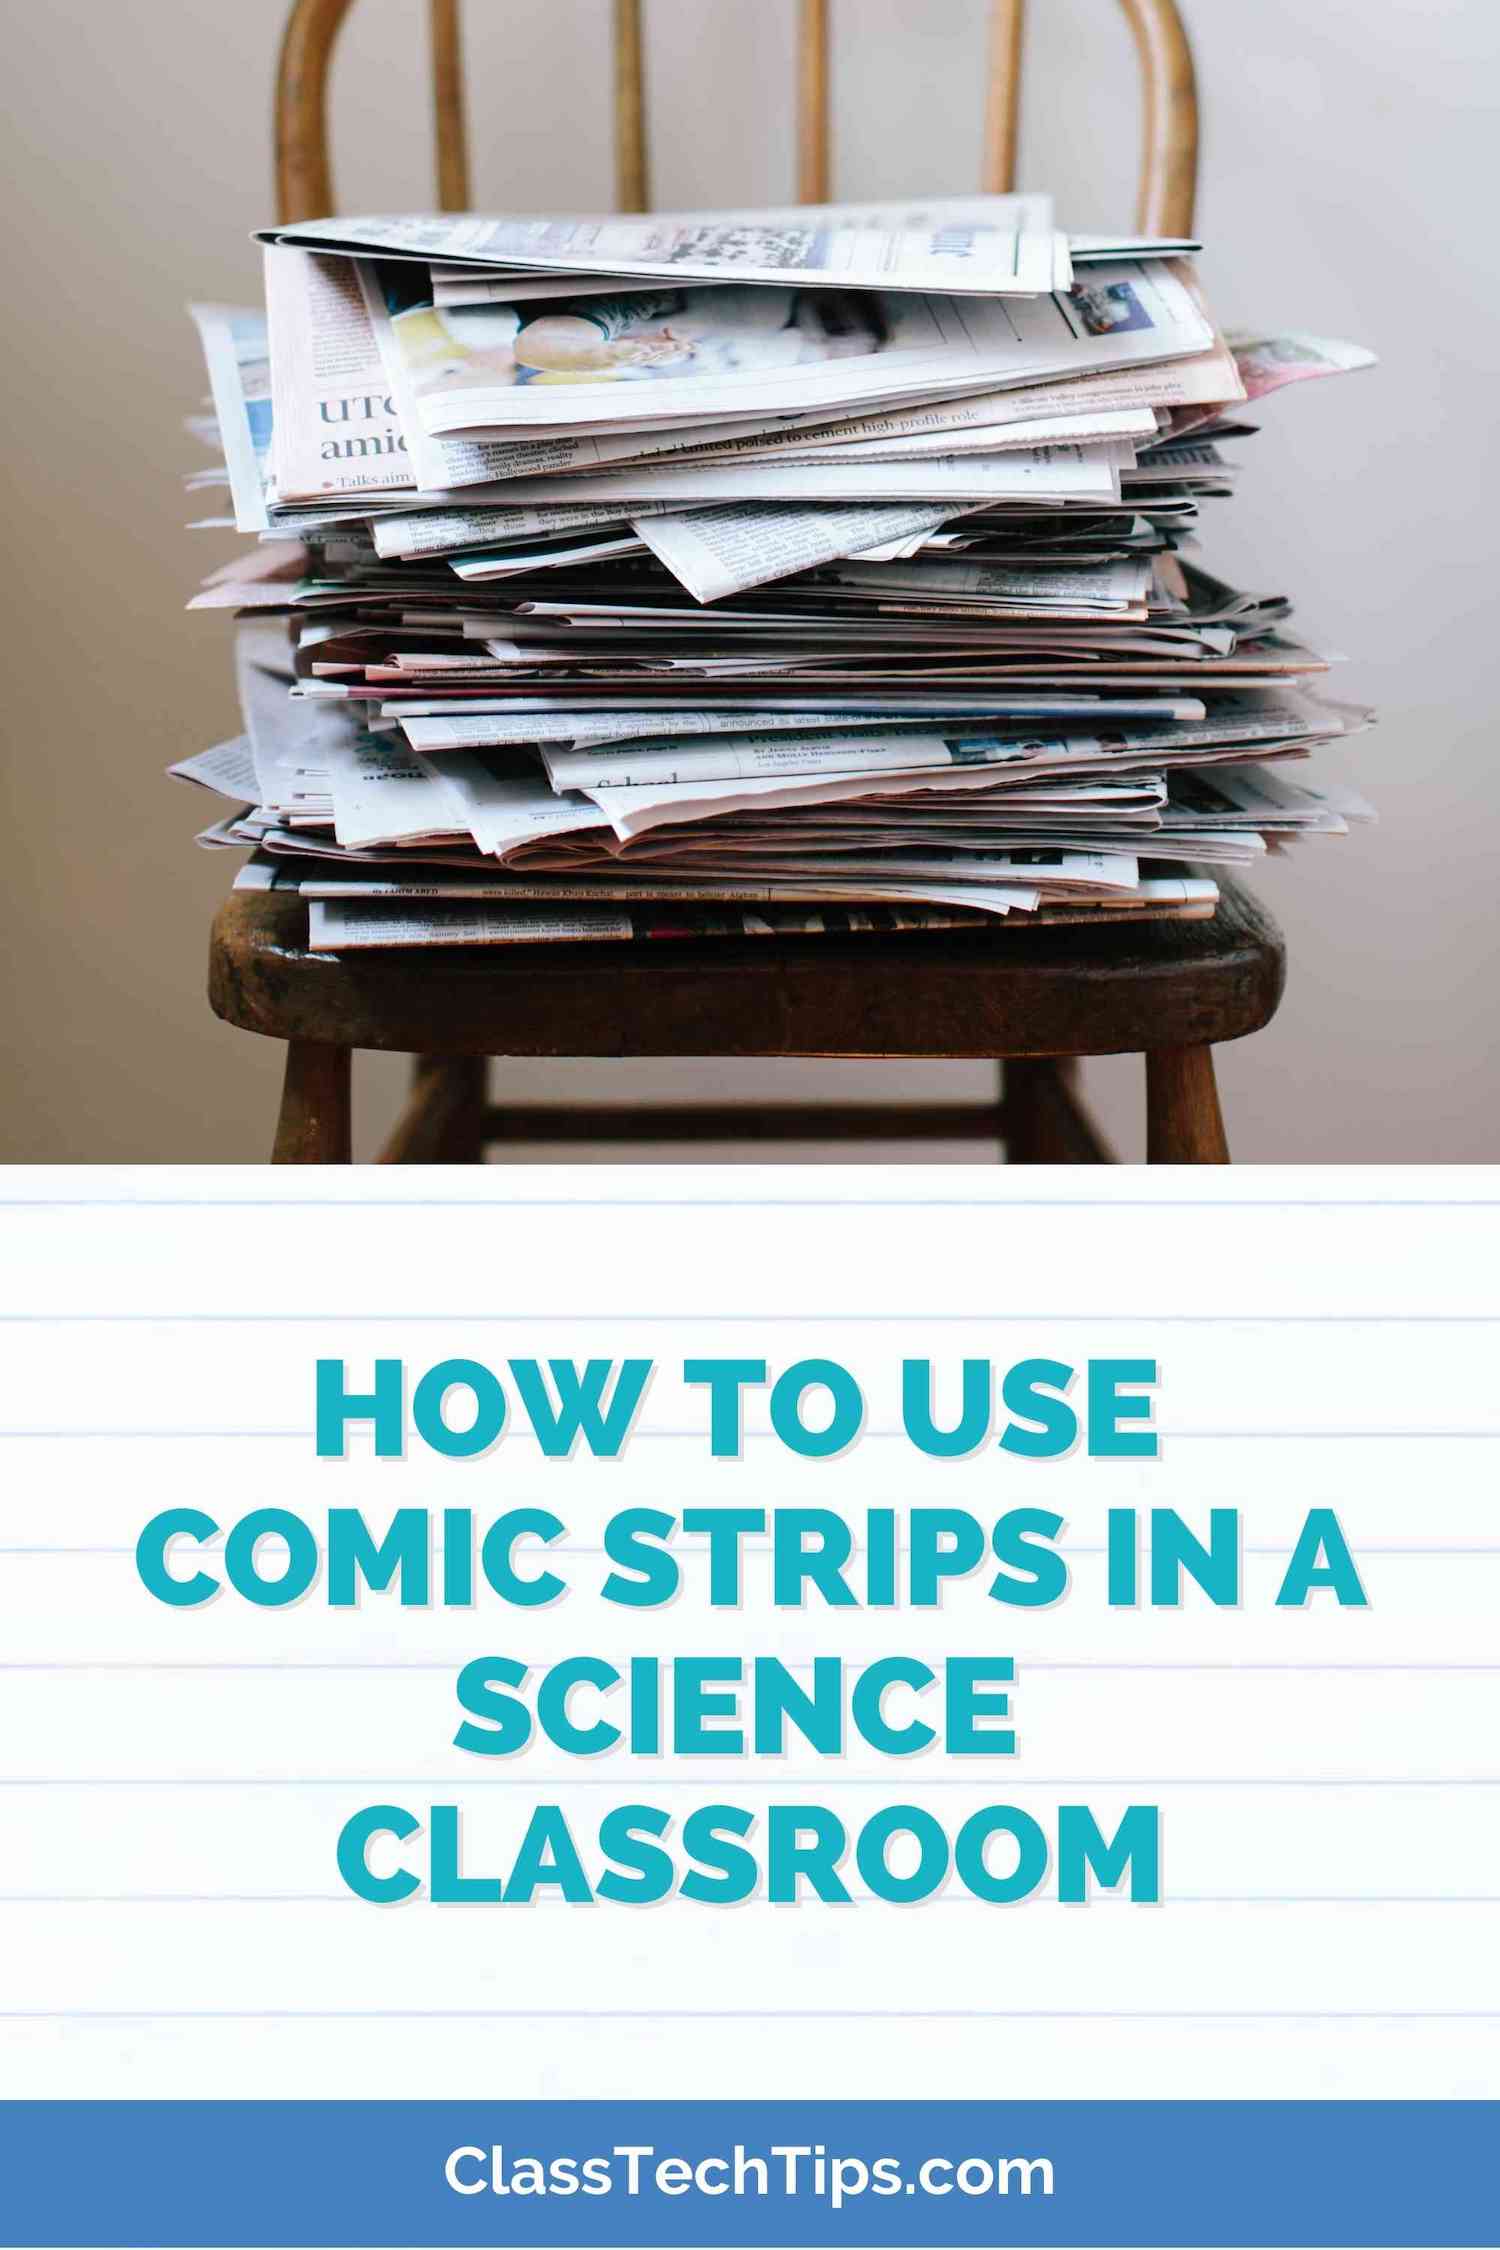 How-to-Use-Comic-Strips-in-a-Science-Classroom